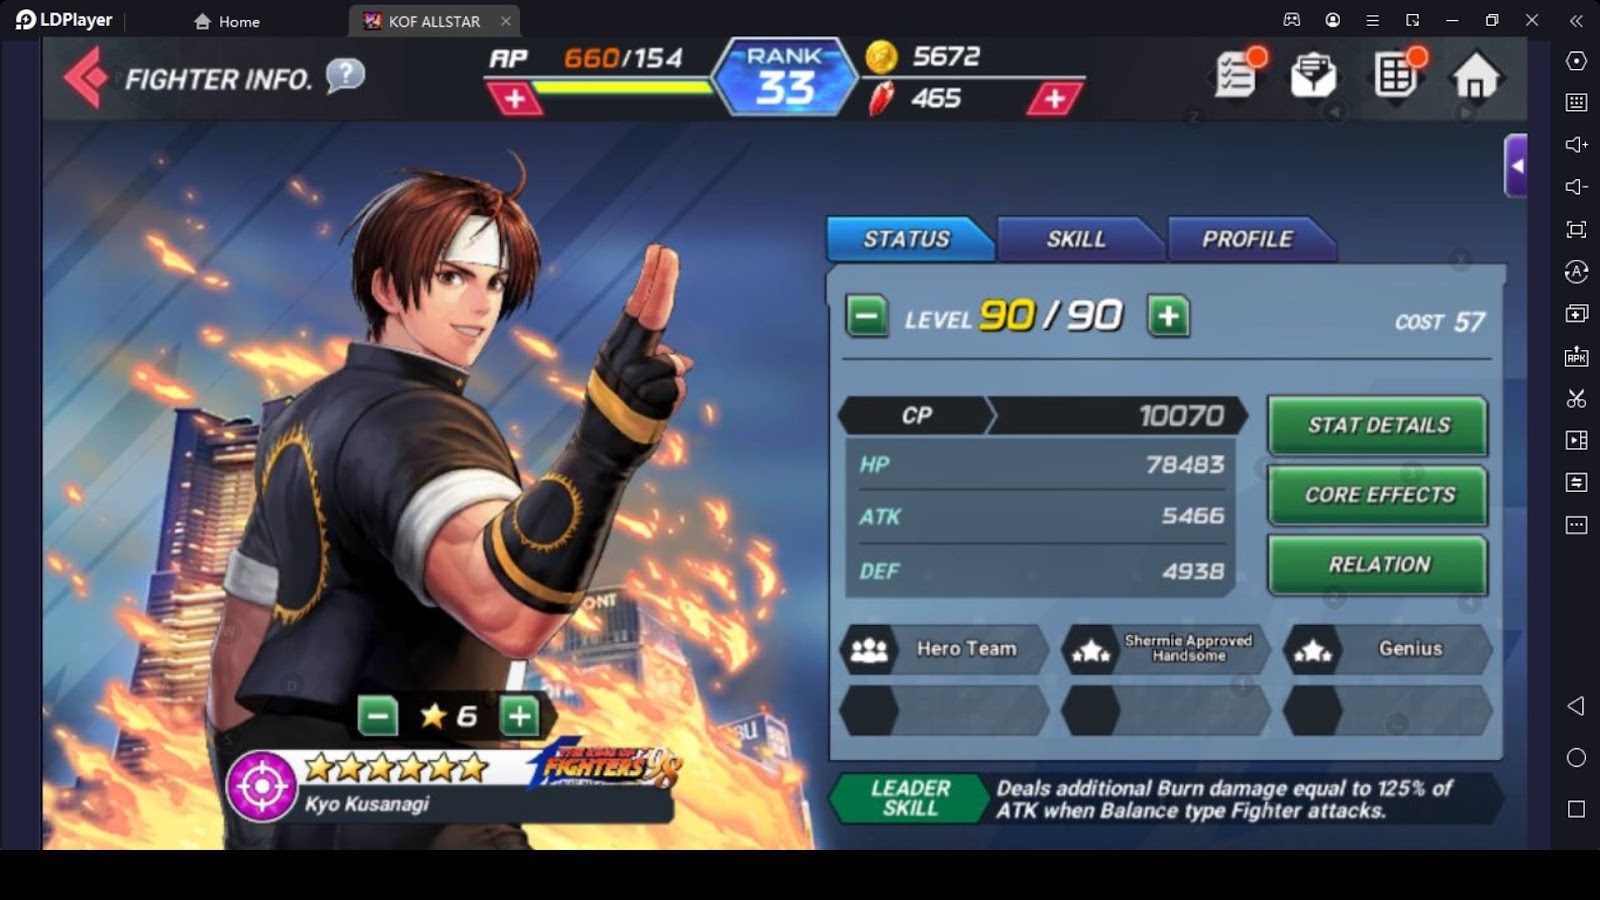 The King of Fighters Beginner Tips to Level up Fast-Game Guides